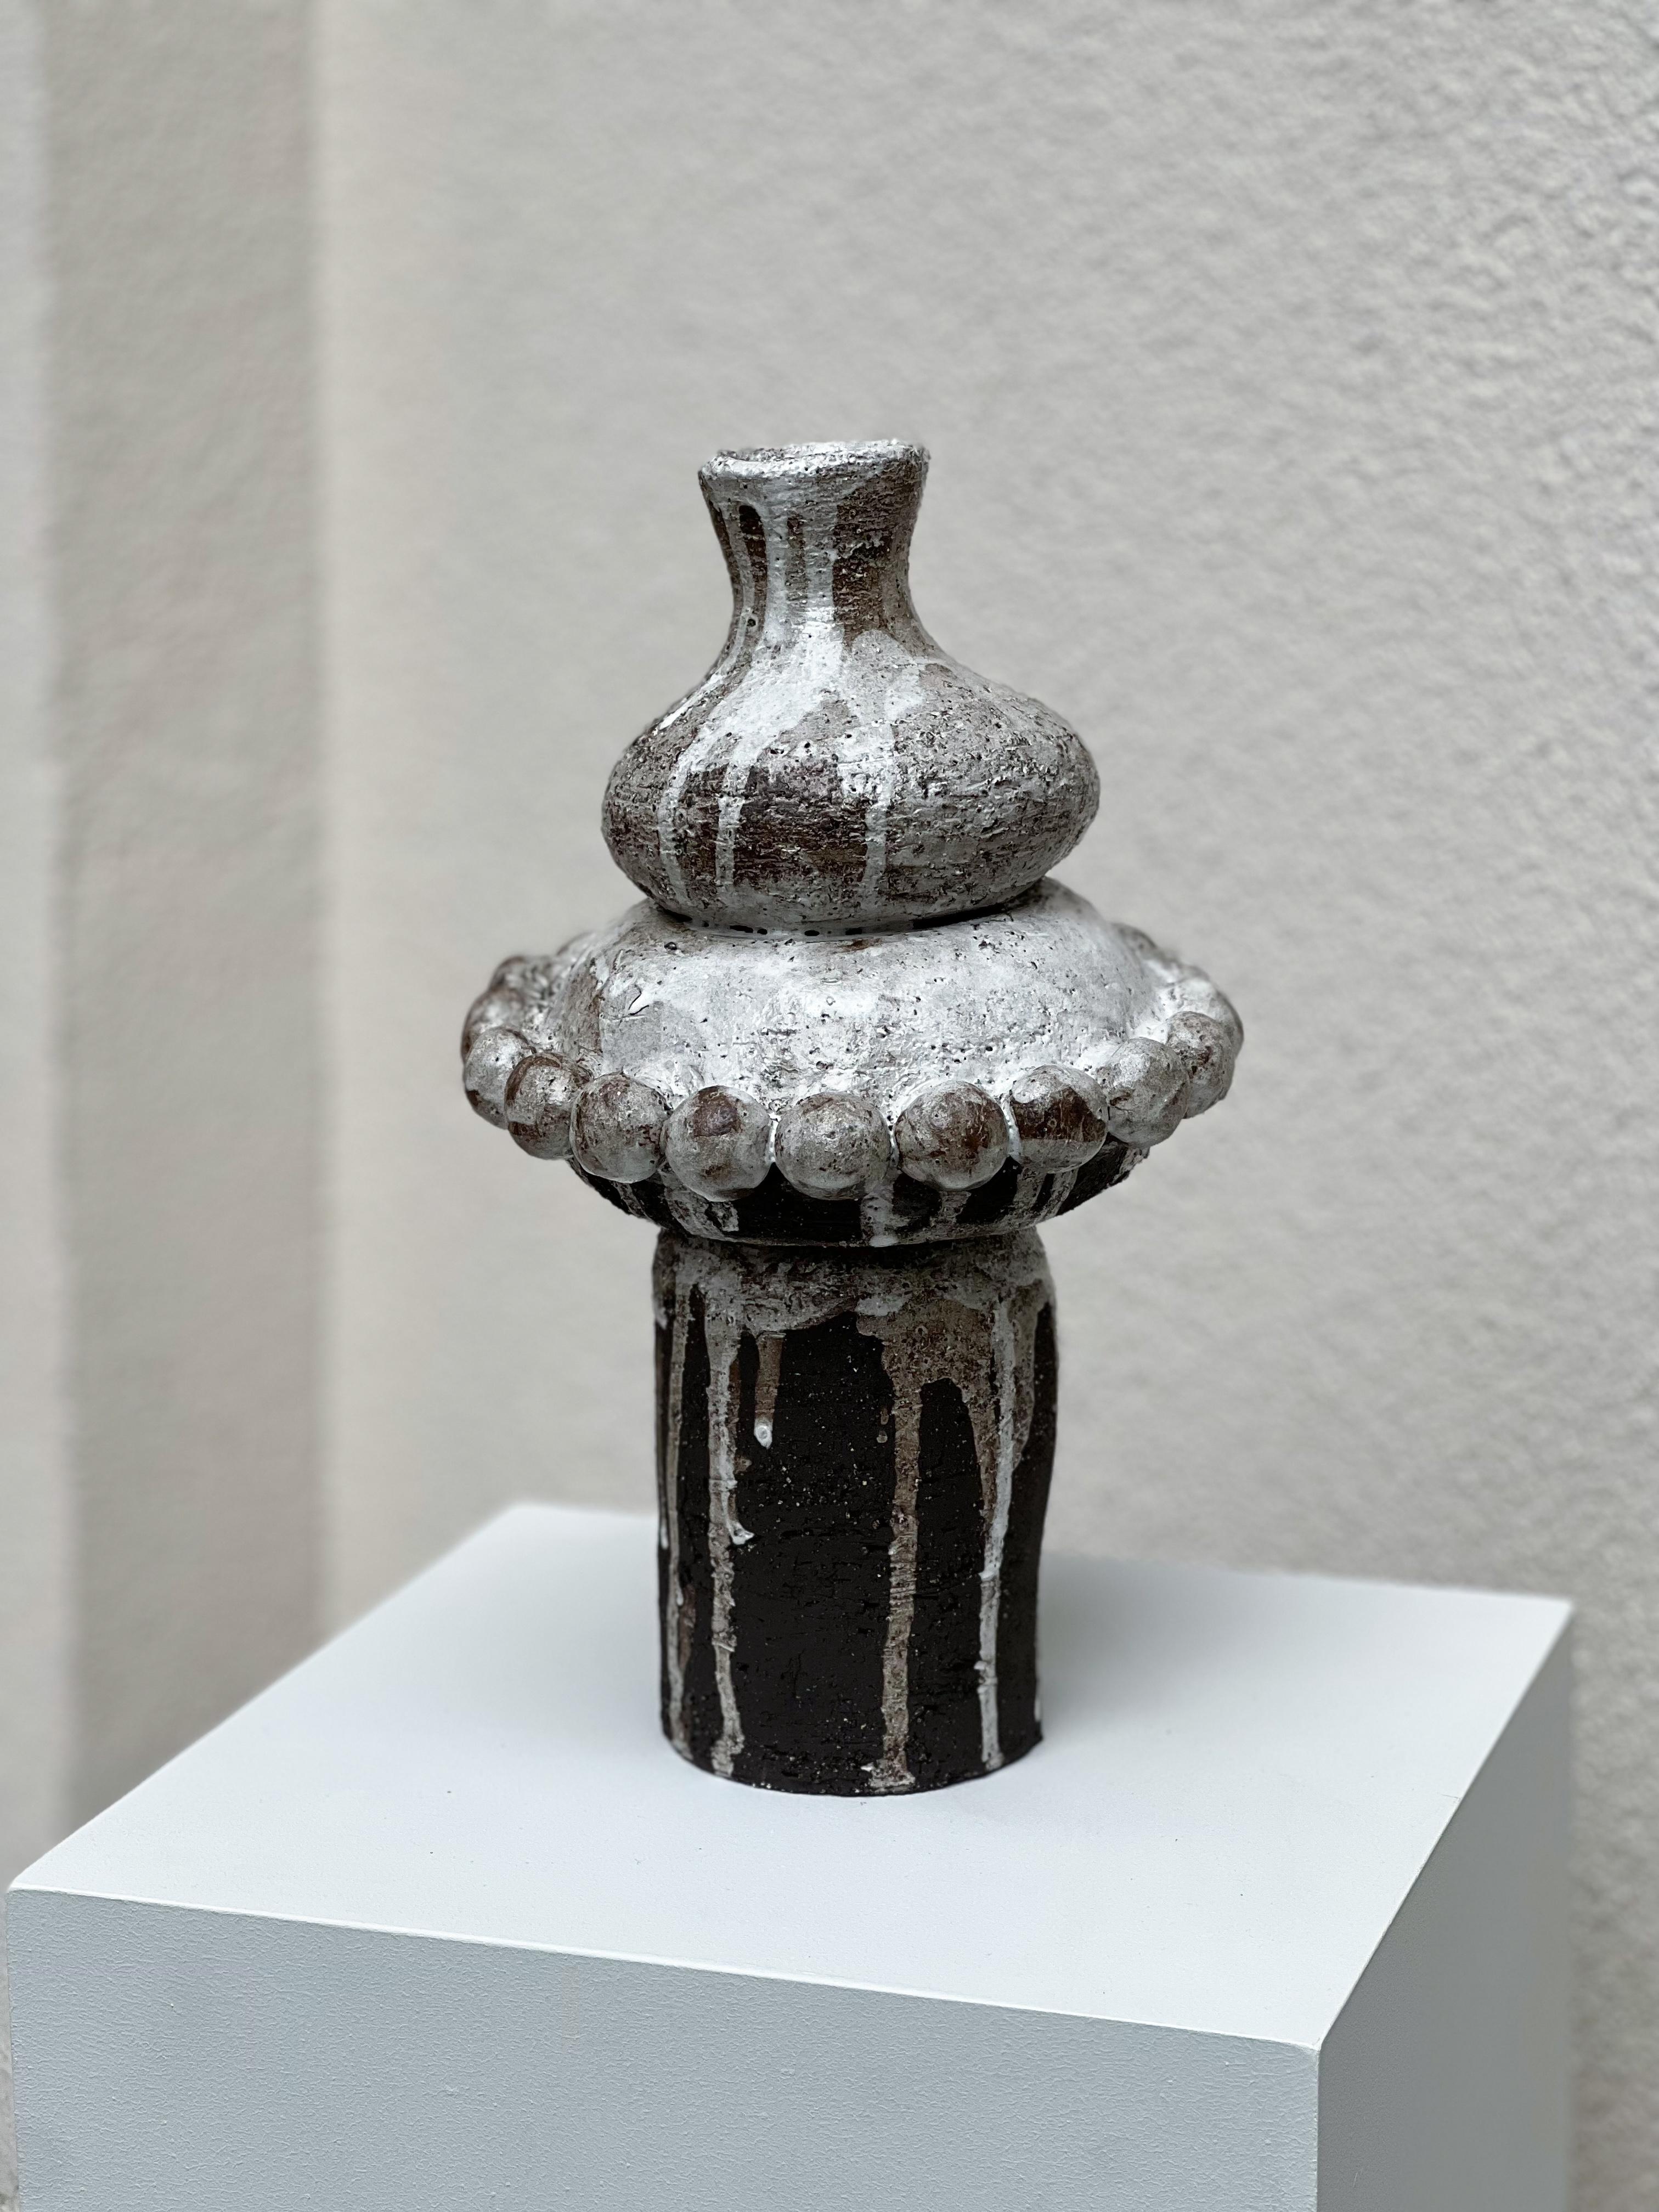 Anatolian 2 Vase by Güler Elçi
Dimensions: W 20.3 x D 20.3 x H 30 cm.
Materials: Stoneware Ceramic.

Güler Elçi is a ceramic artist based in Istanbul. In the light of her engineering career, she considers ceramics as a material and likes to push the